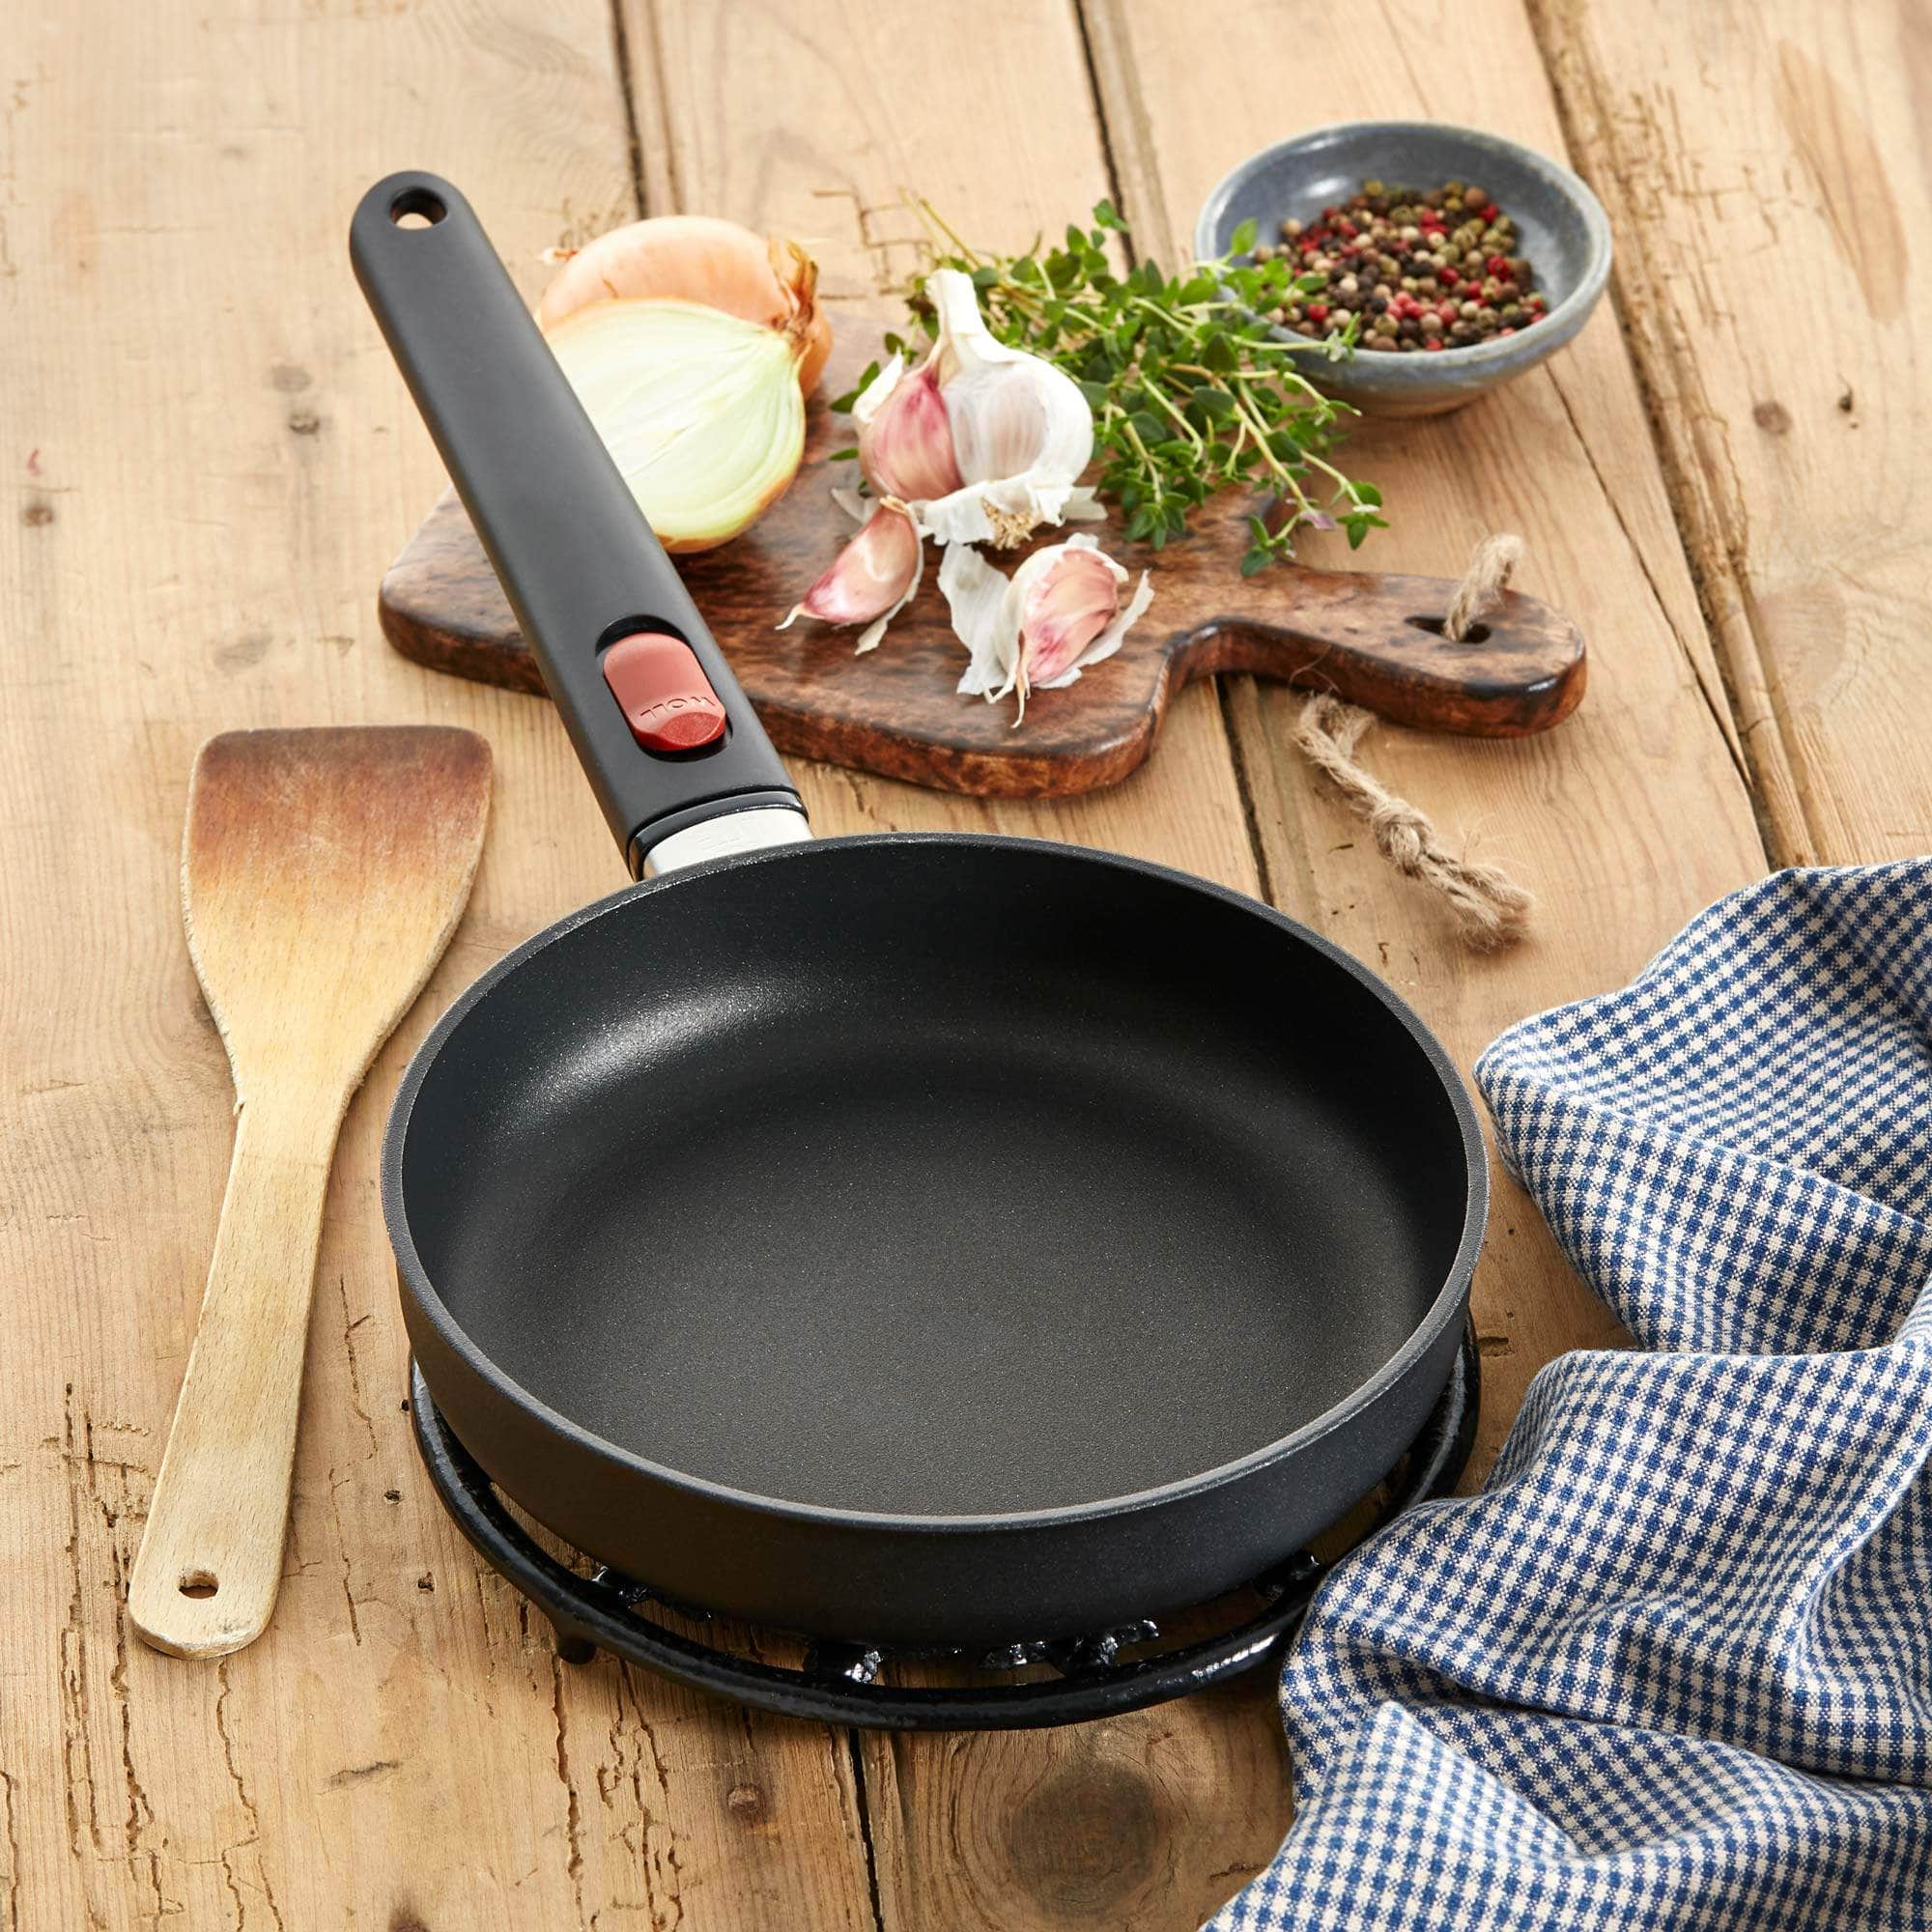 Woll Nowo Titanium 11-Inch Nonstick Frying Pan With Detachable